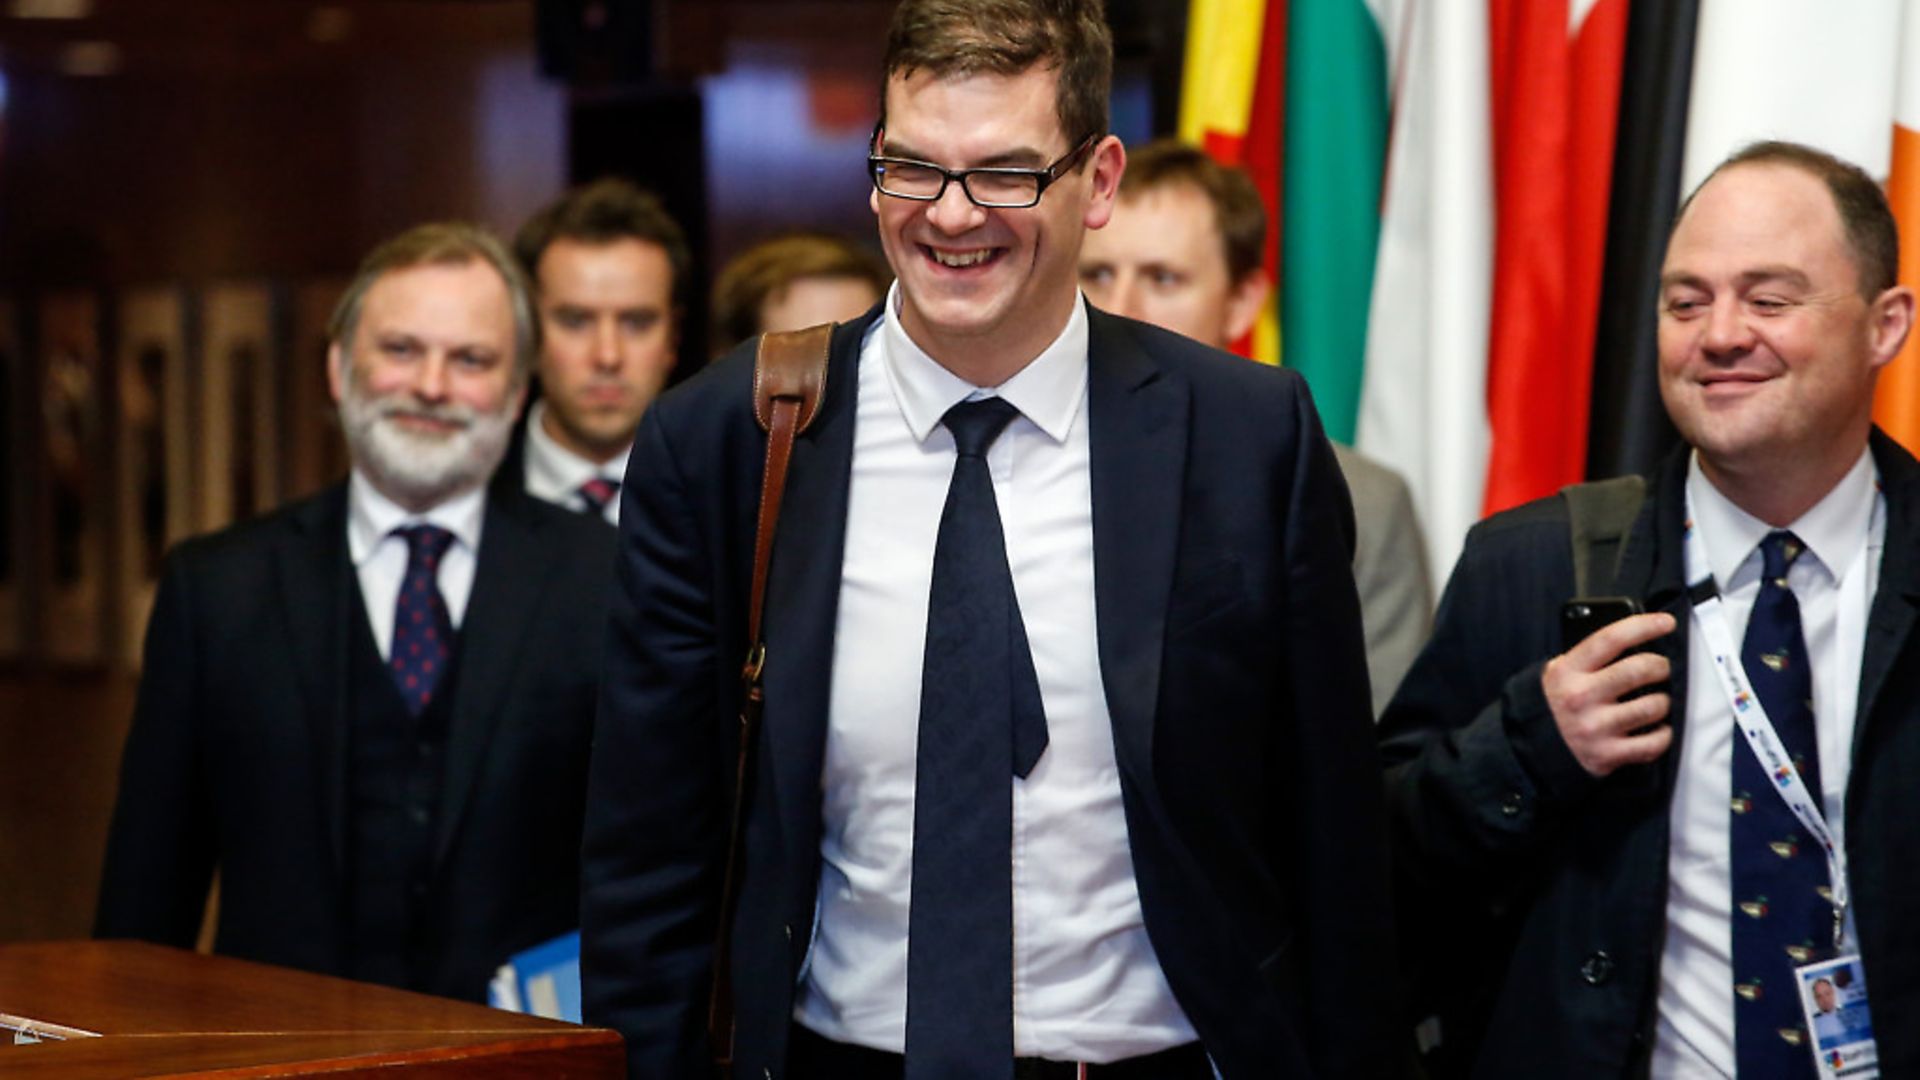 Oliver Robbins, permanent secretary for the Department for Exiting the European Union (EU), center, leaves the Eastern Partnership Summit at the Europa building in Brussels. Photo: Dario Pignatelli/Bloomberg via Getty Images - Credit: Bloomberg via Getty Images